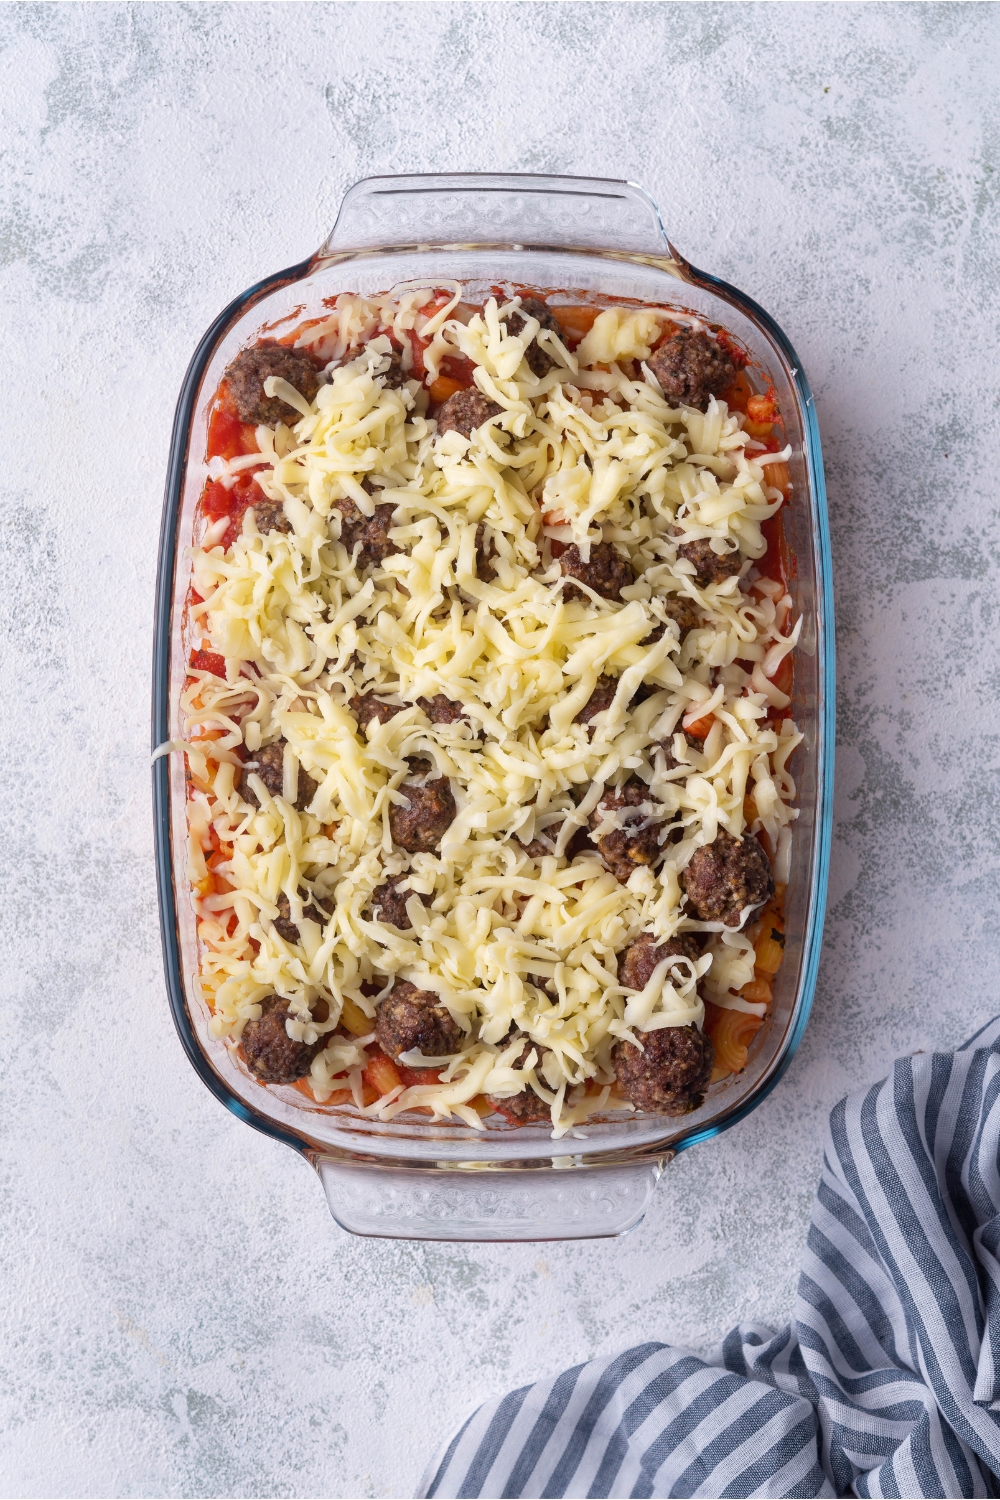 A clear baking dish filled with meatballs, pasta, red sauce, and shredded cheese.